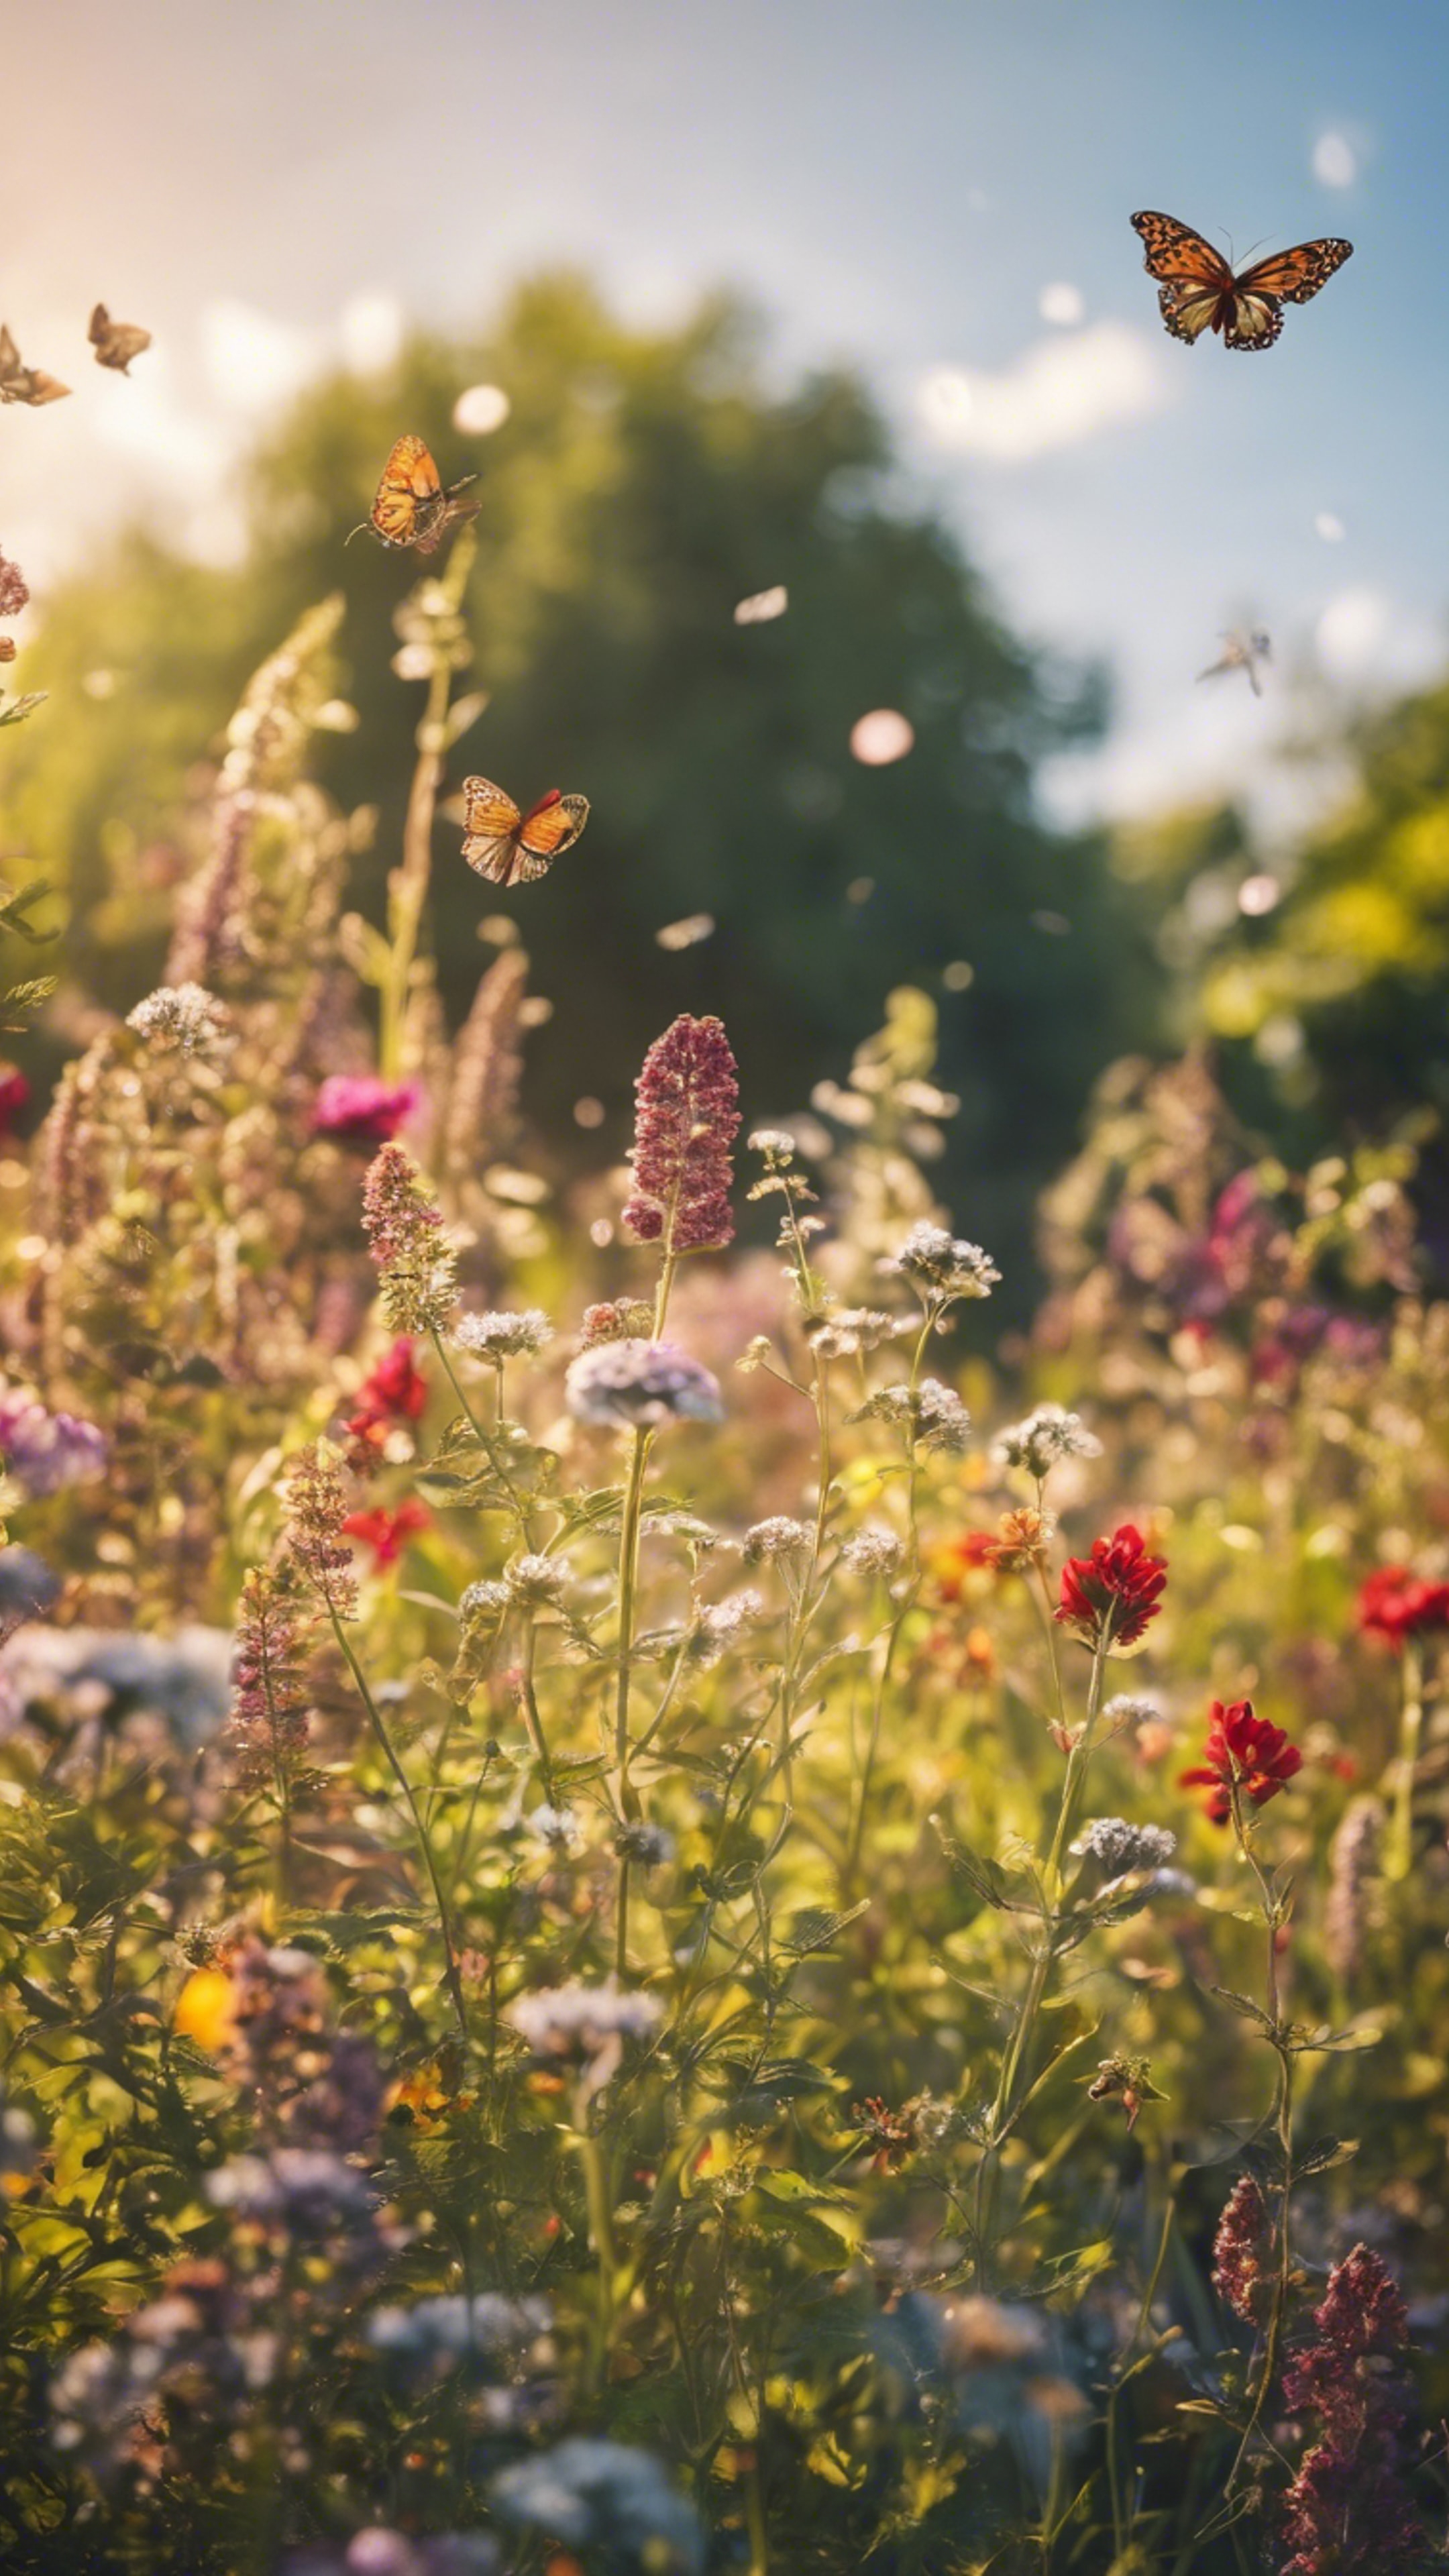 A colorful scene of a French country garden bursting with wildflowers and butterflies under a warm afternoon sun. Тапет[d1166188c03b4b319ebf]